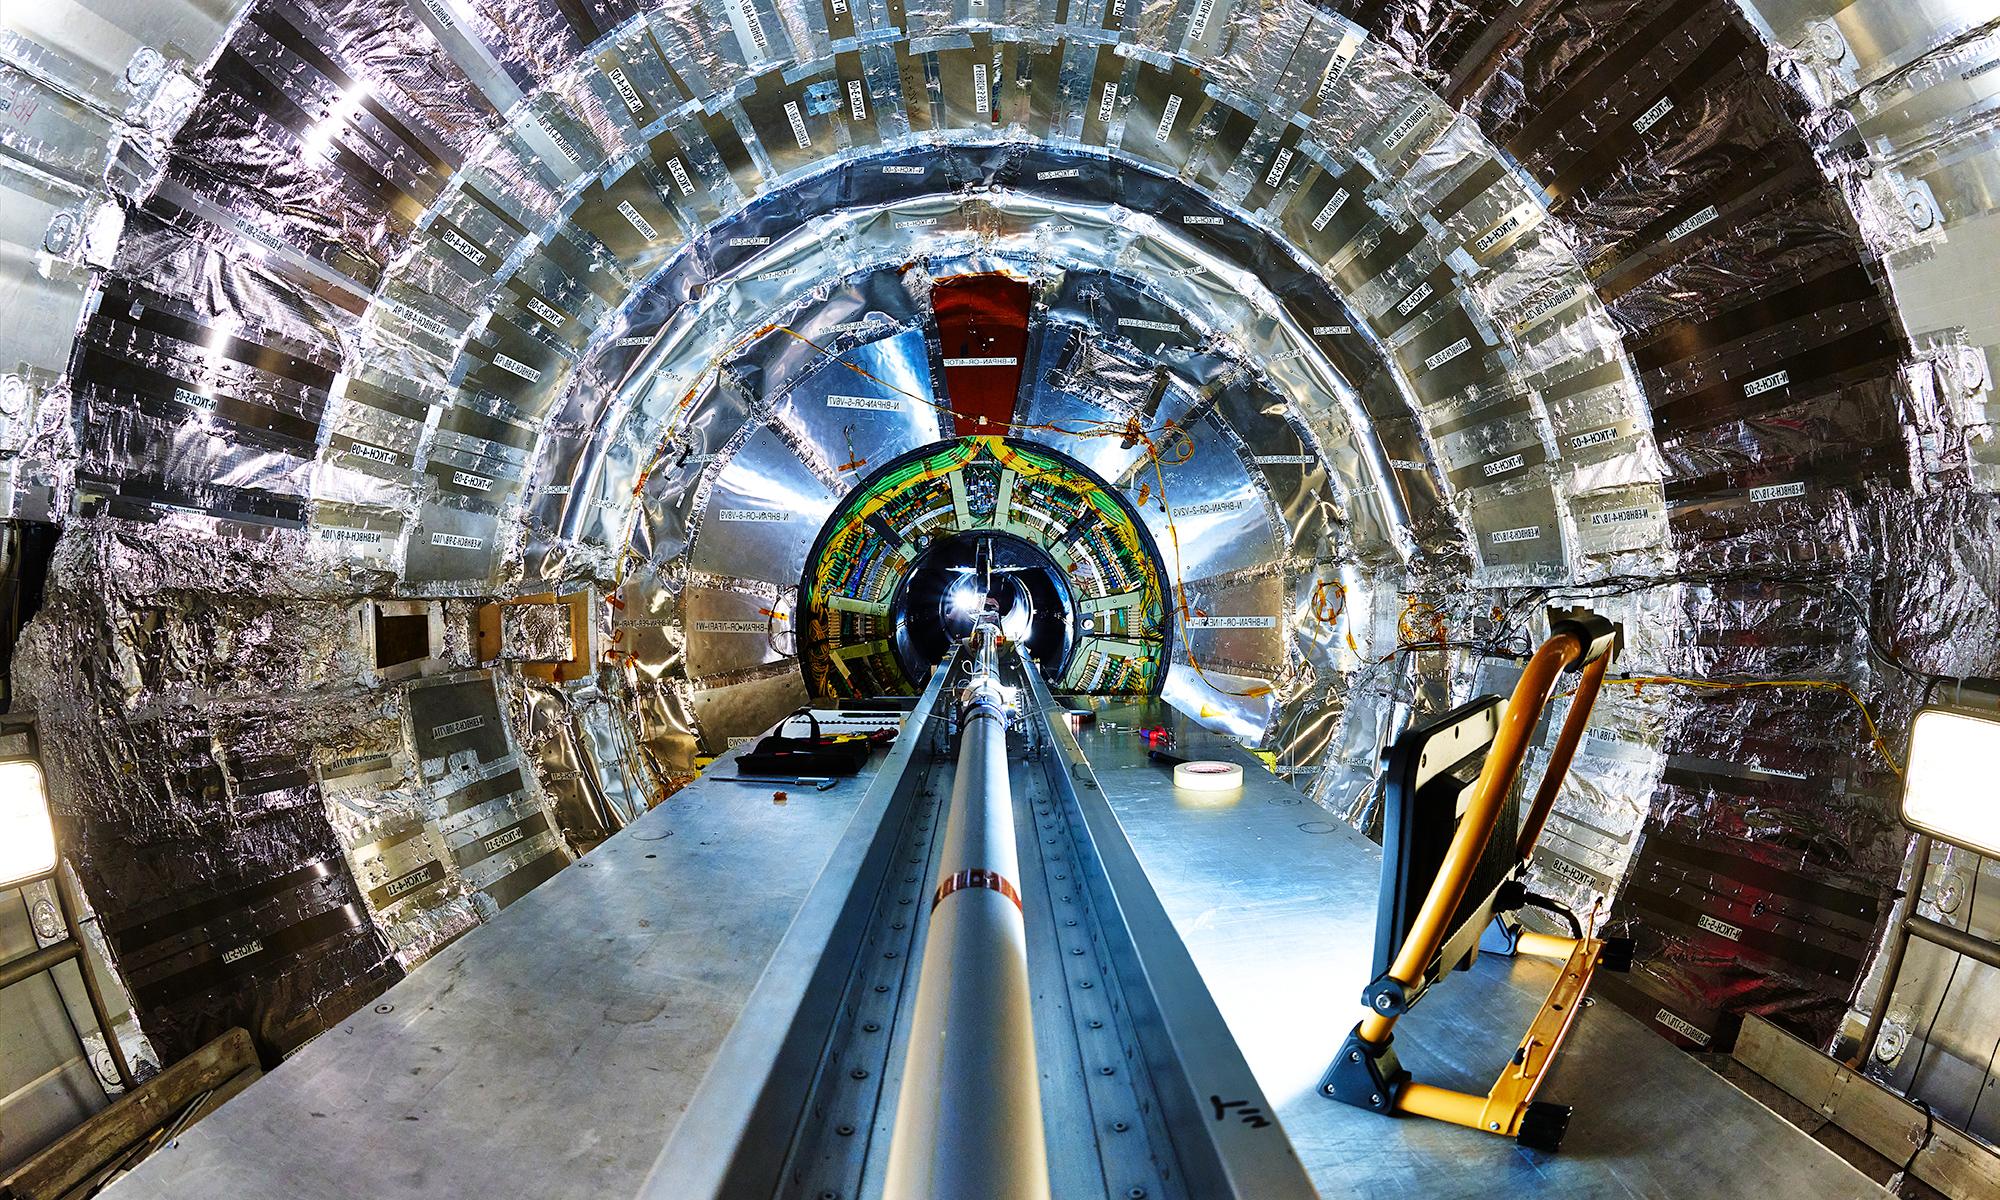 The inside of the CMS detector at CERN, showing a large central beam pipe surrounded by a silver cylinder of detectors.